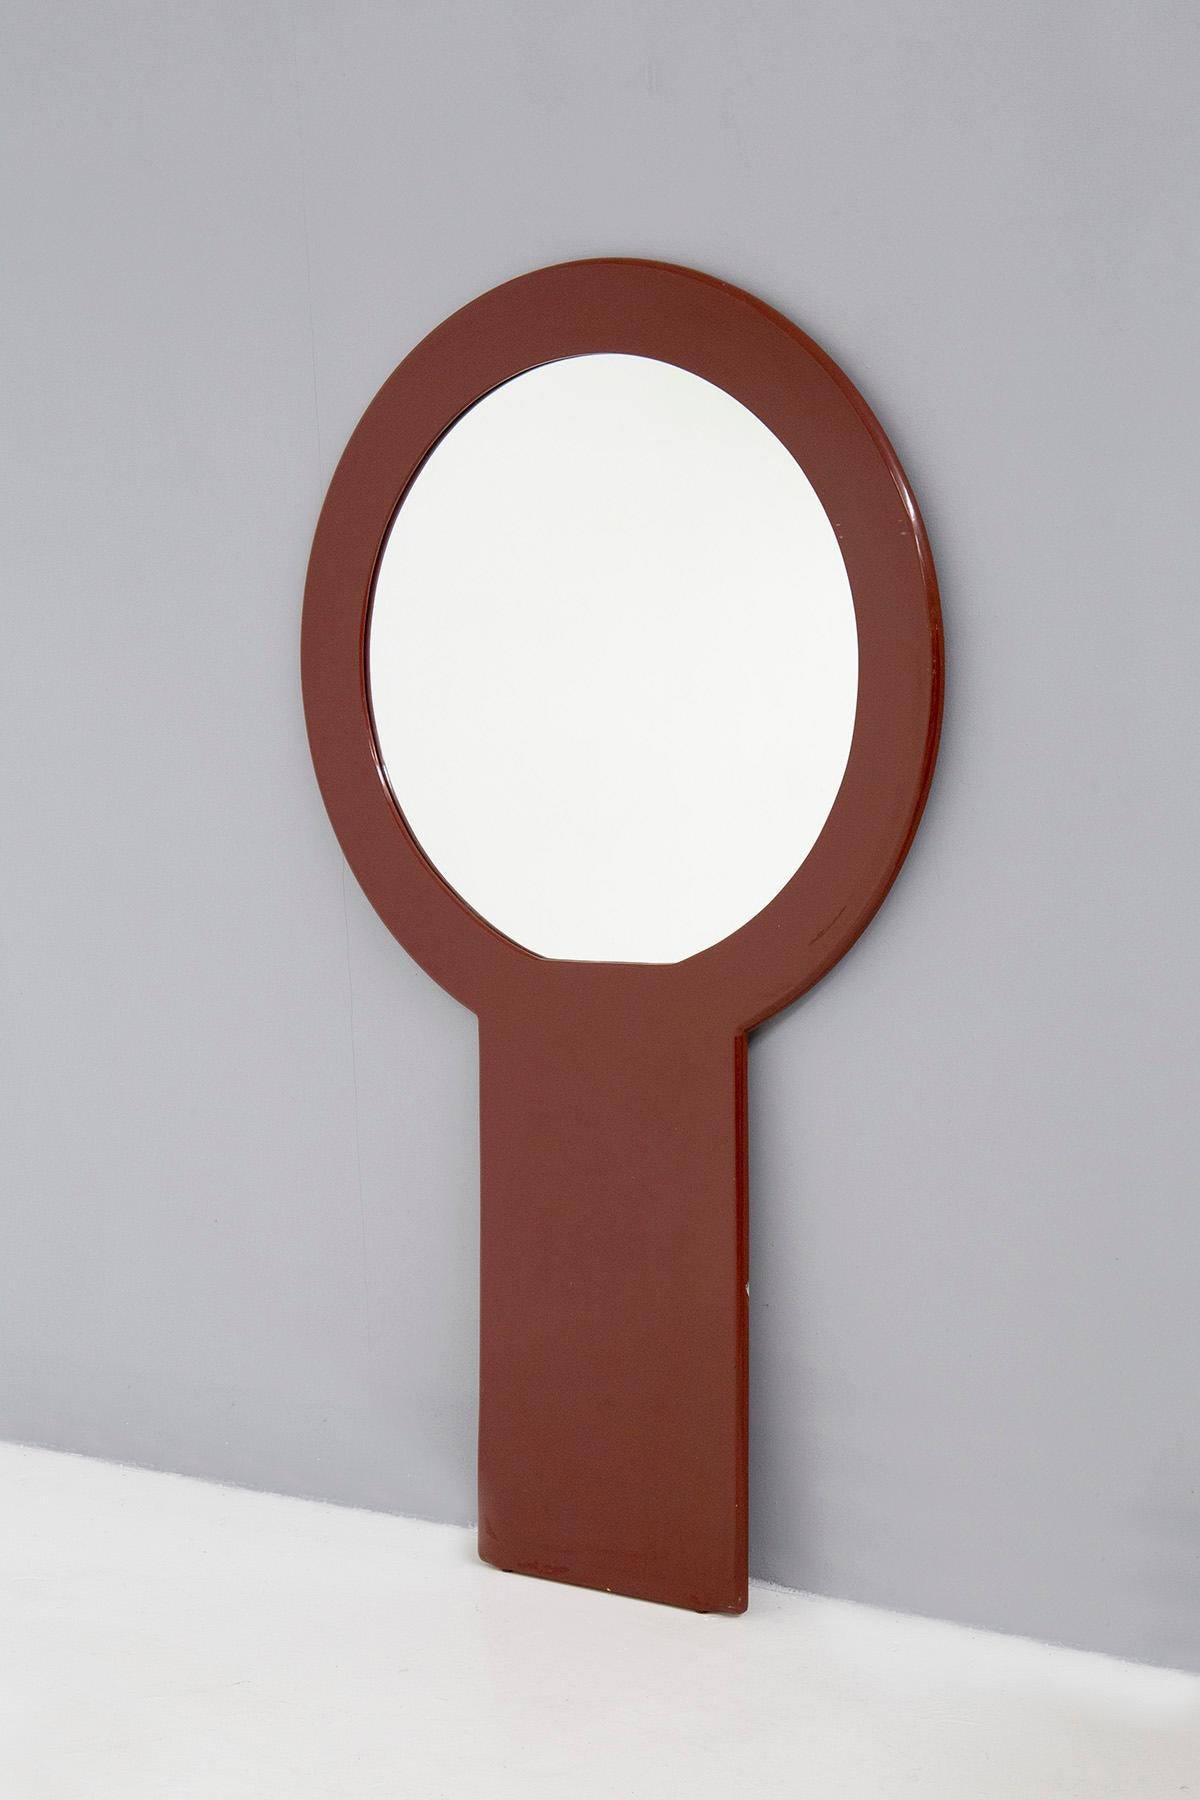 Eccentric and striking Italian wall mirror from the 1970s. Made by the Italian manufacture :FratelliI Sbrilli to Poggibonzi.
Label present in the back of the mirror. Made of brick red lacquered wood with circular mirror inside. Typically 1970s